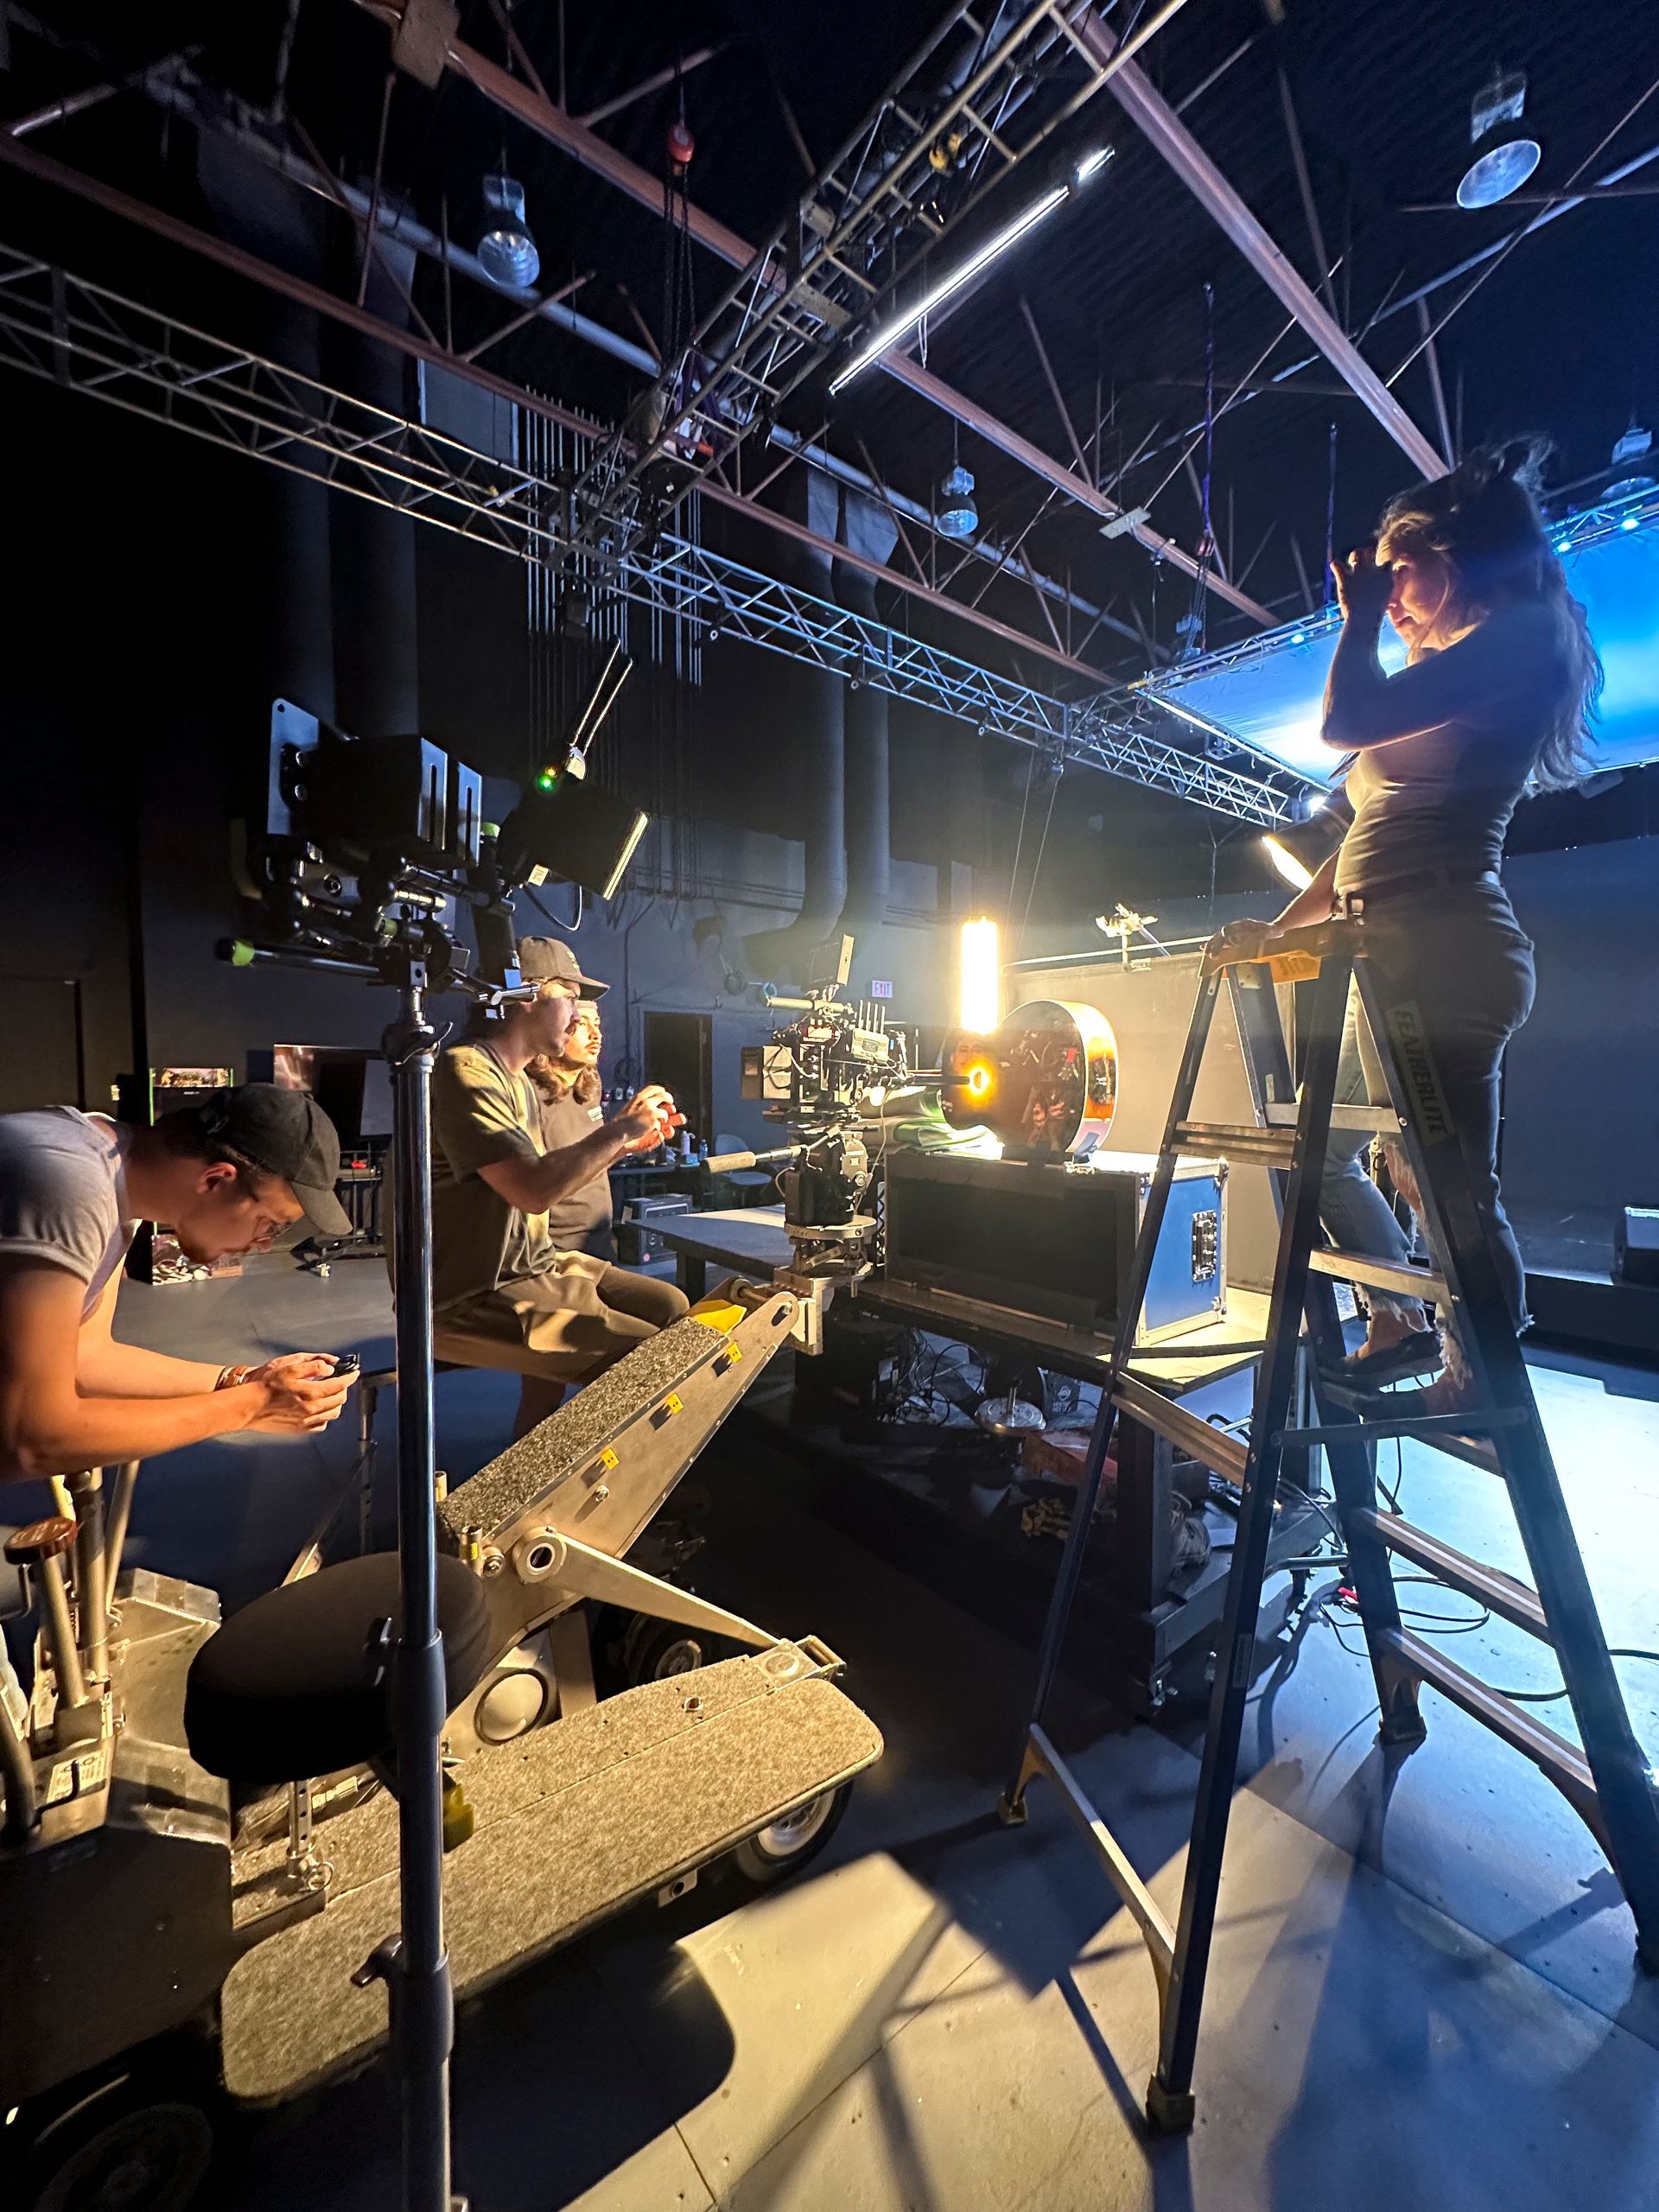 A group of people are working on a set in a dark room.